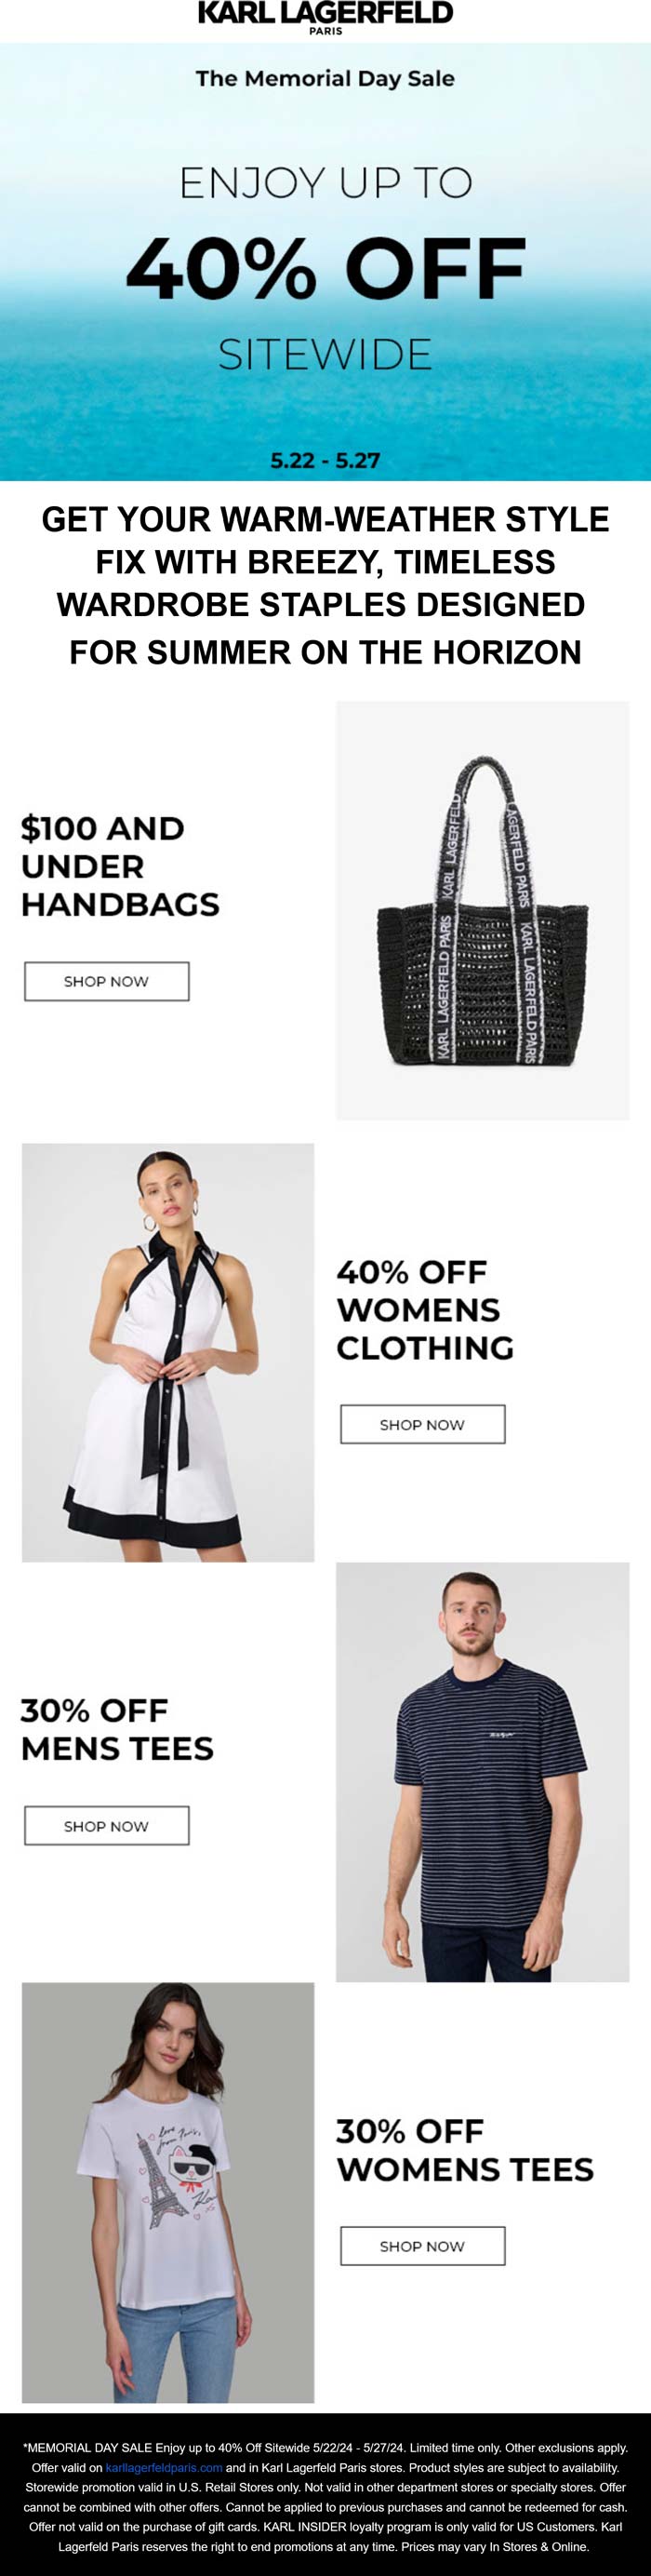 Karl Lagerfeld stores Coupon  30-40% off at Karl Lagerfeld, ditto online #karllagerfeld 